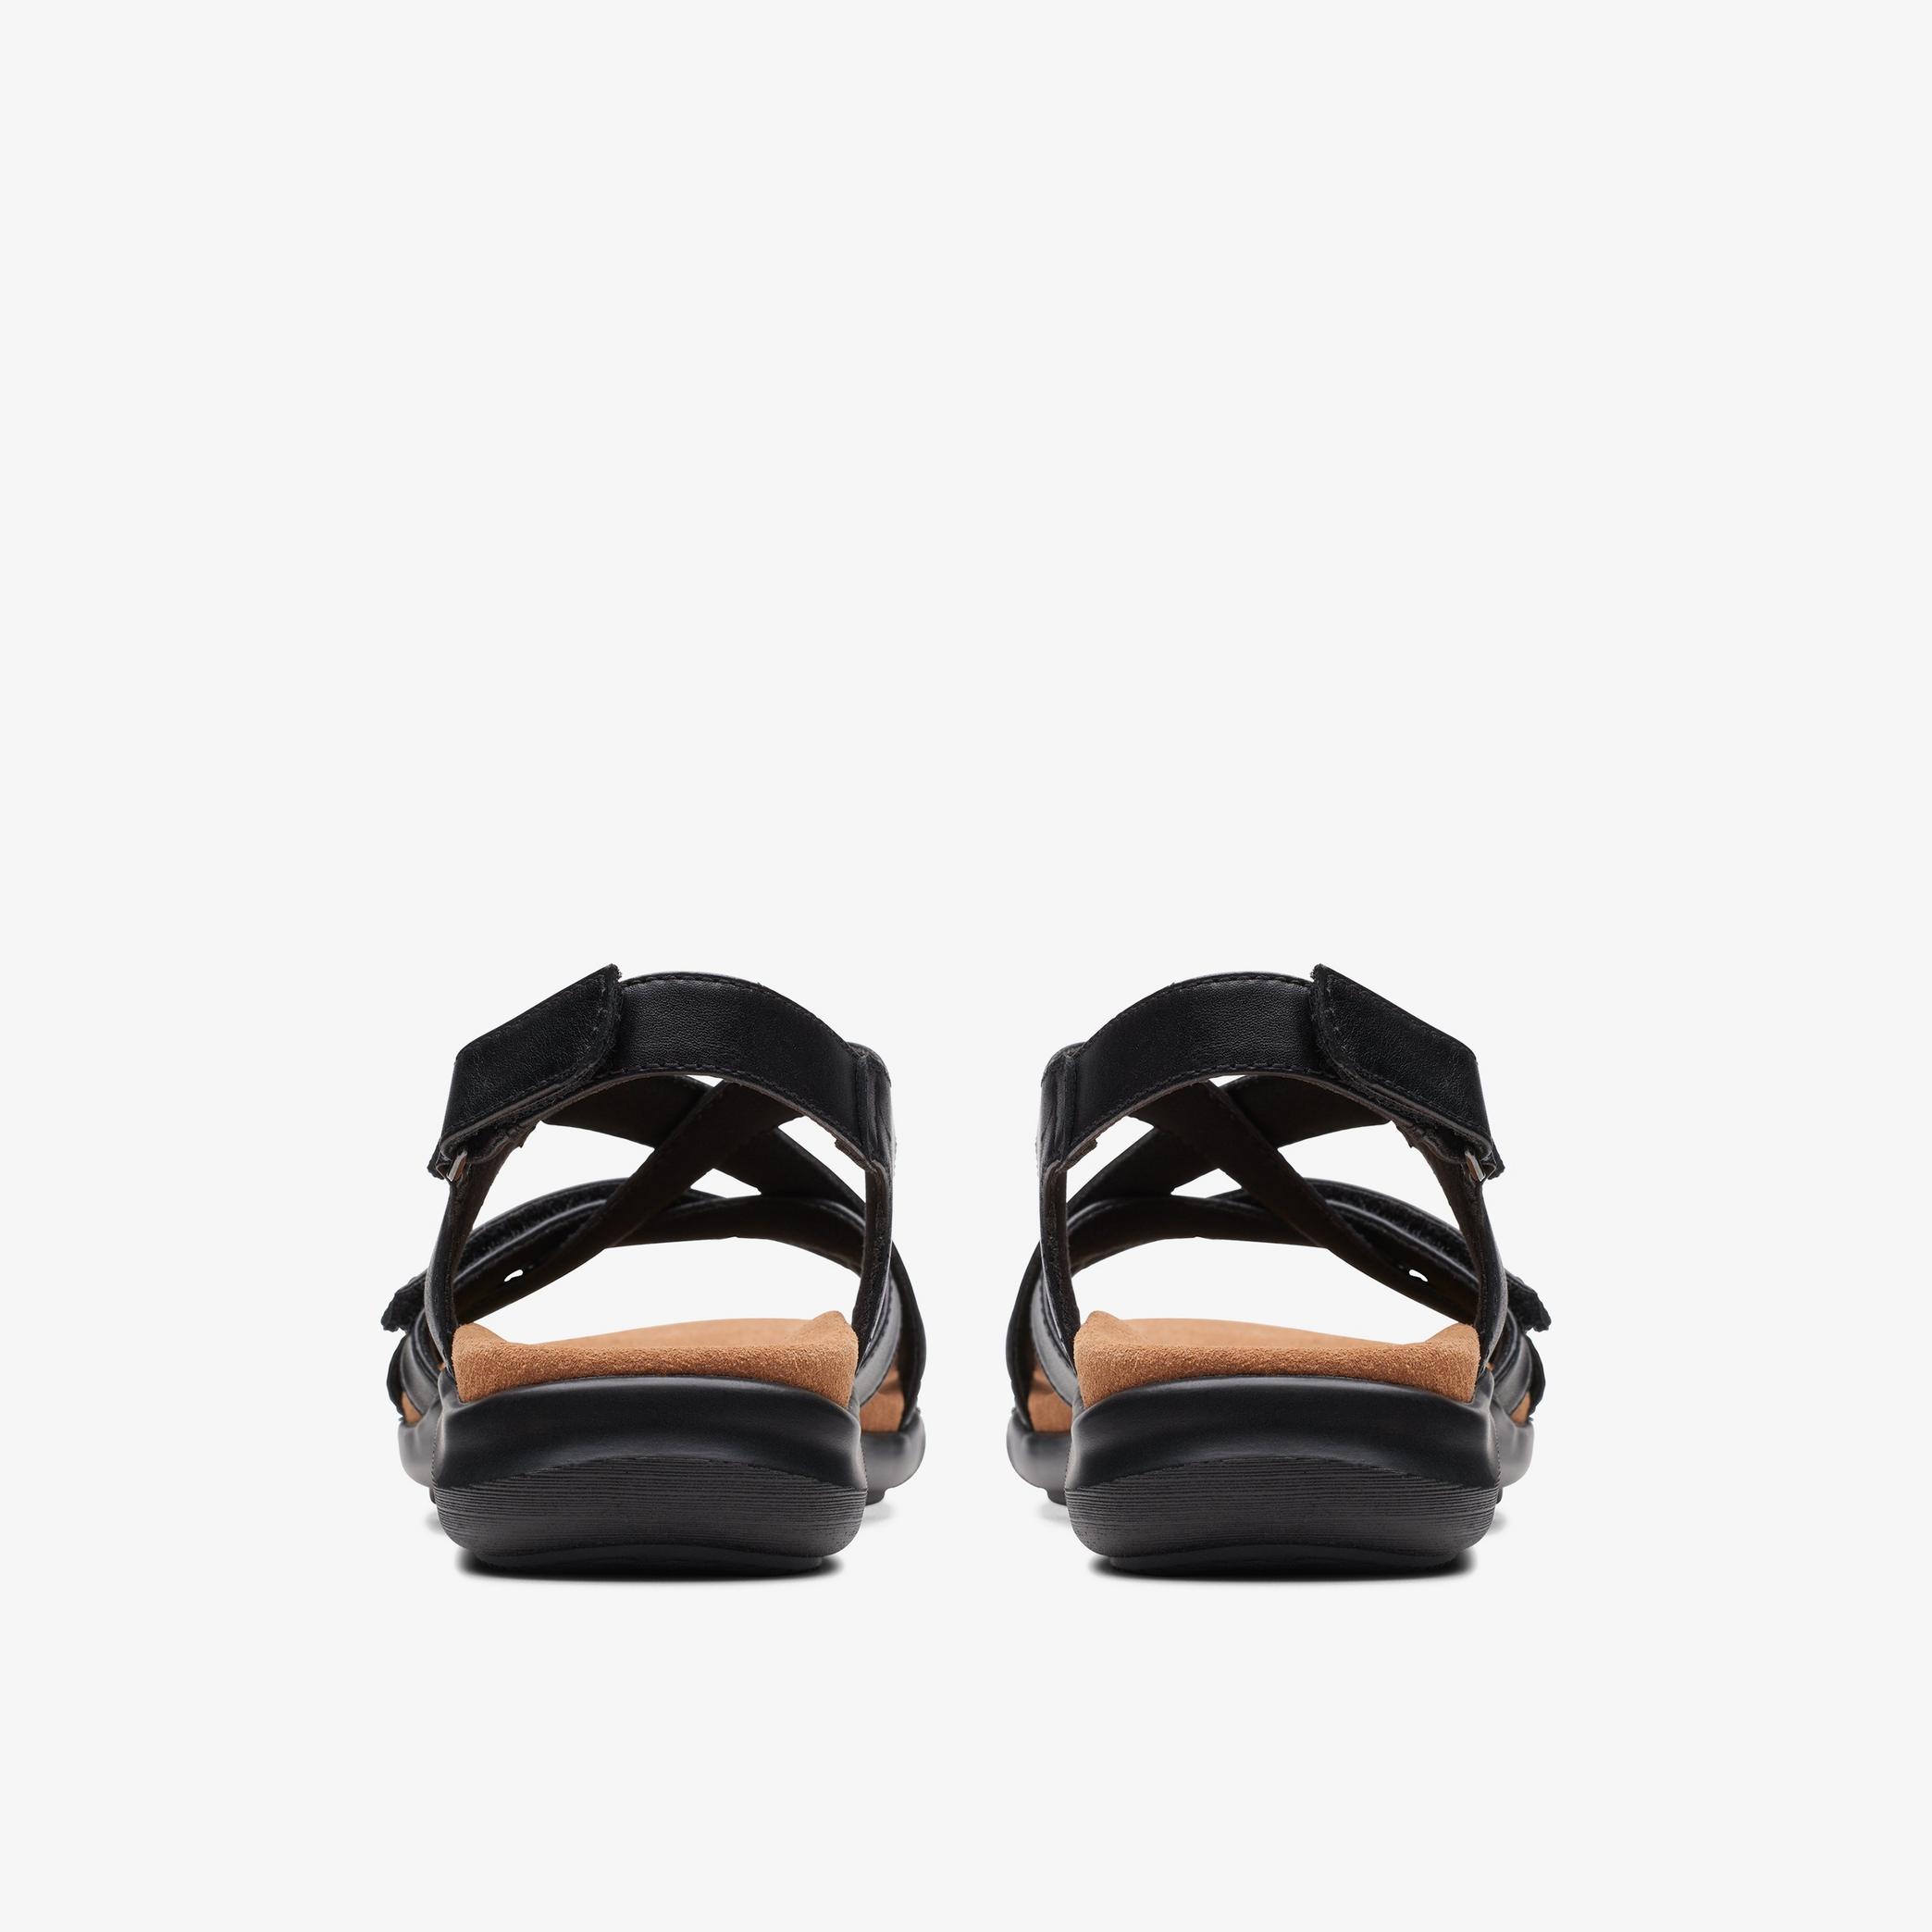 Kitly Go Black Leather Flat Sandals, view 5 of 6